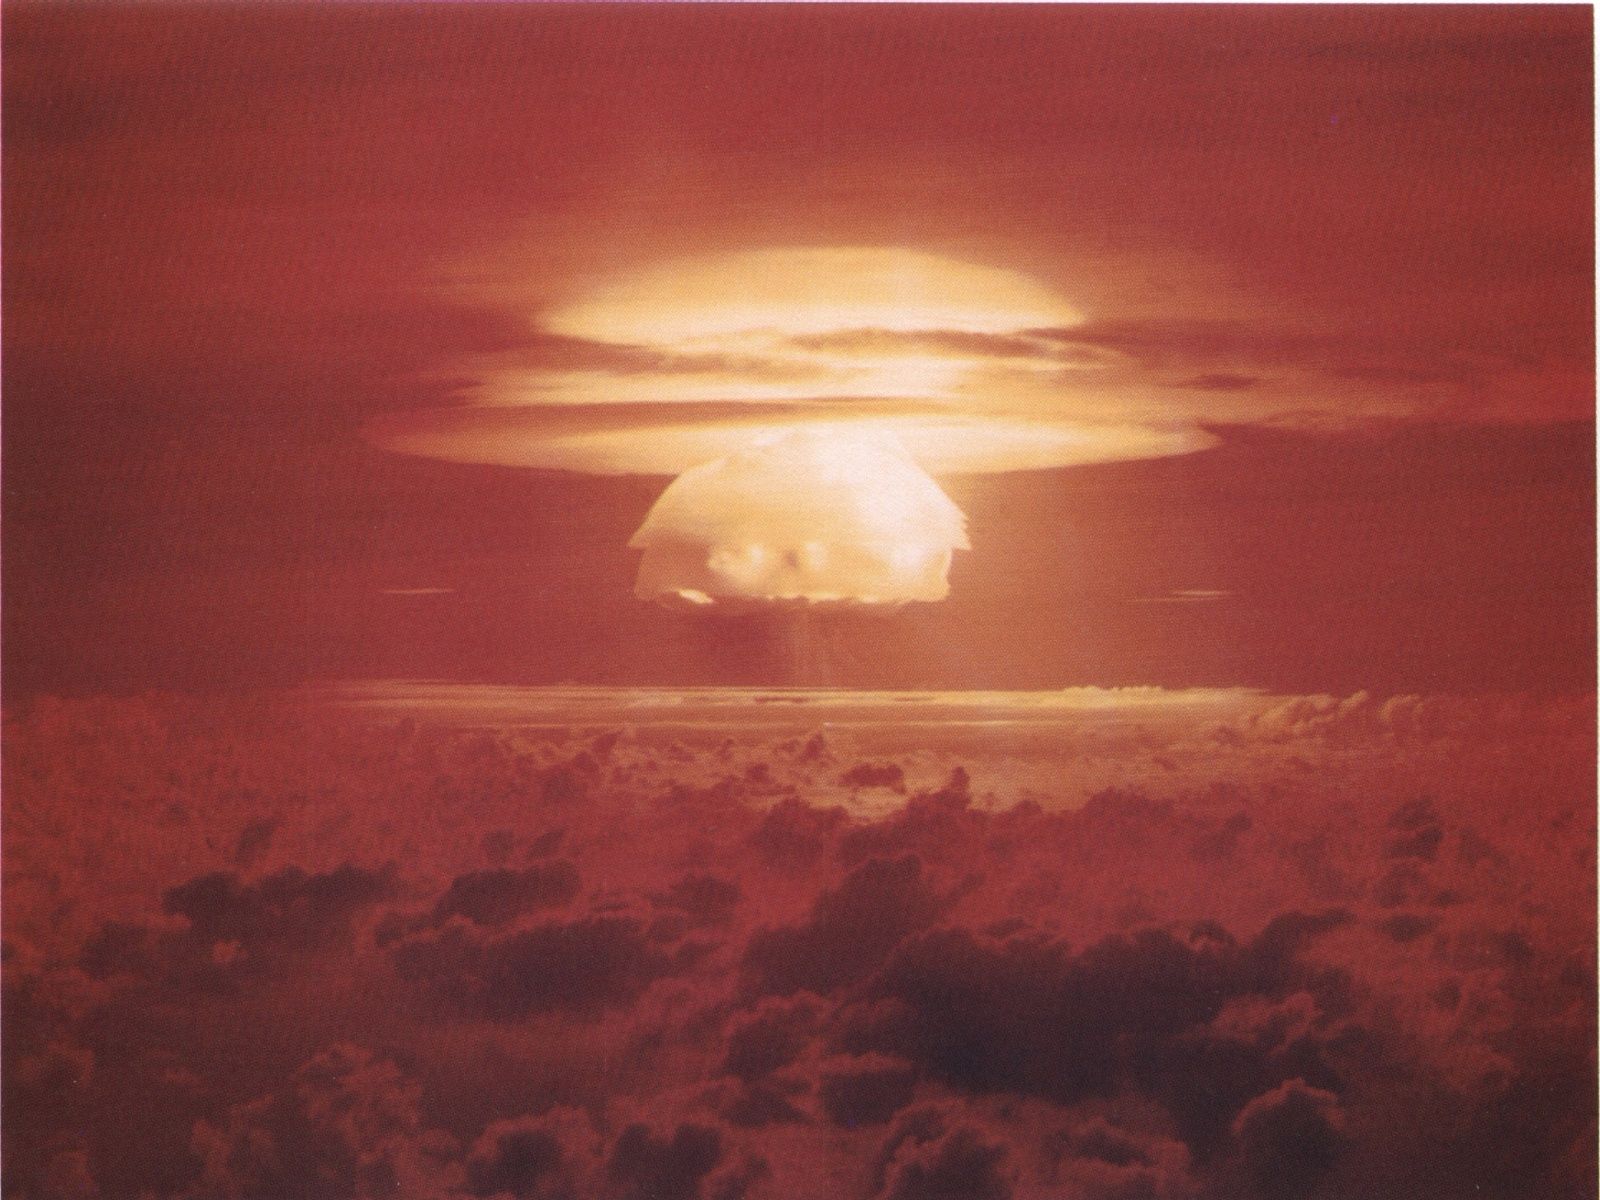 A Nuclear War Between the U.S. and Russia Would Starve 5 Billion People